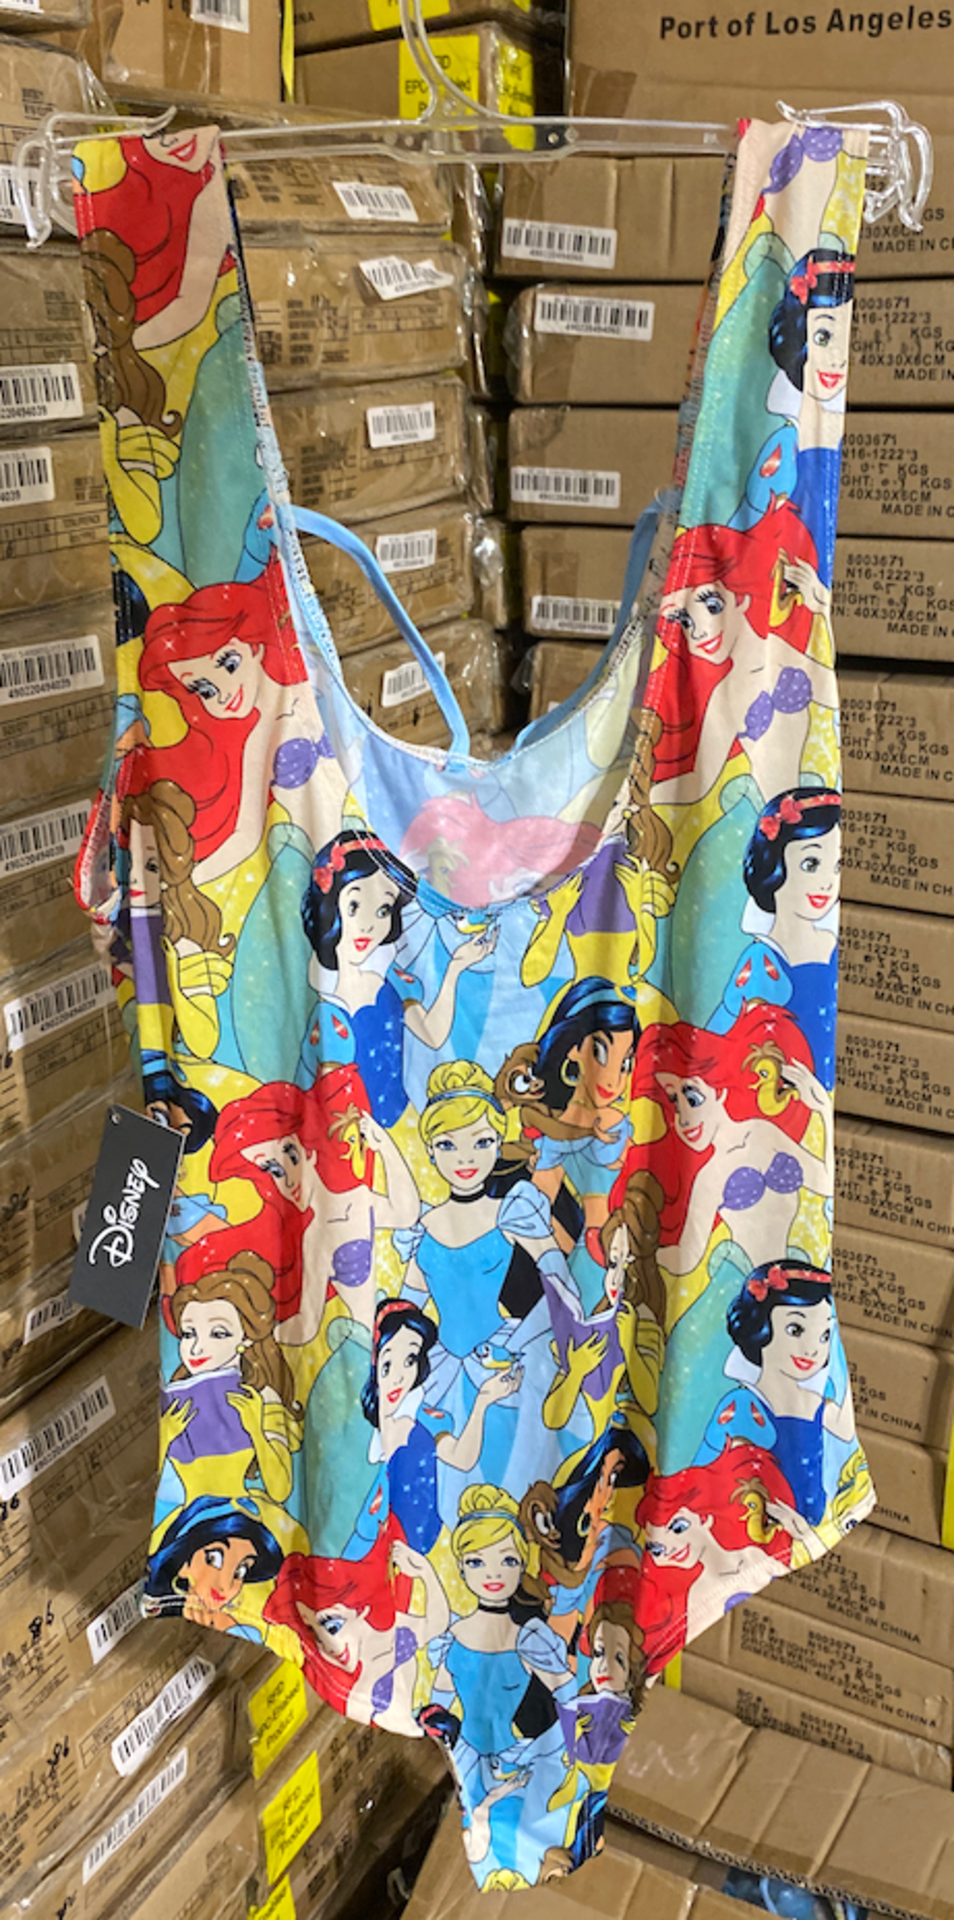 735 DISNEY'S PRINCESS GIRLS BODYSUIT, NEW WITH TAGS ON HANGERS LOCATED IN MIAMI, FL $11,000 VALUE